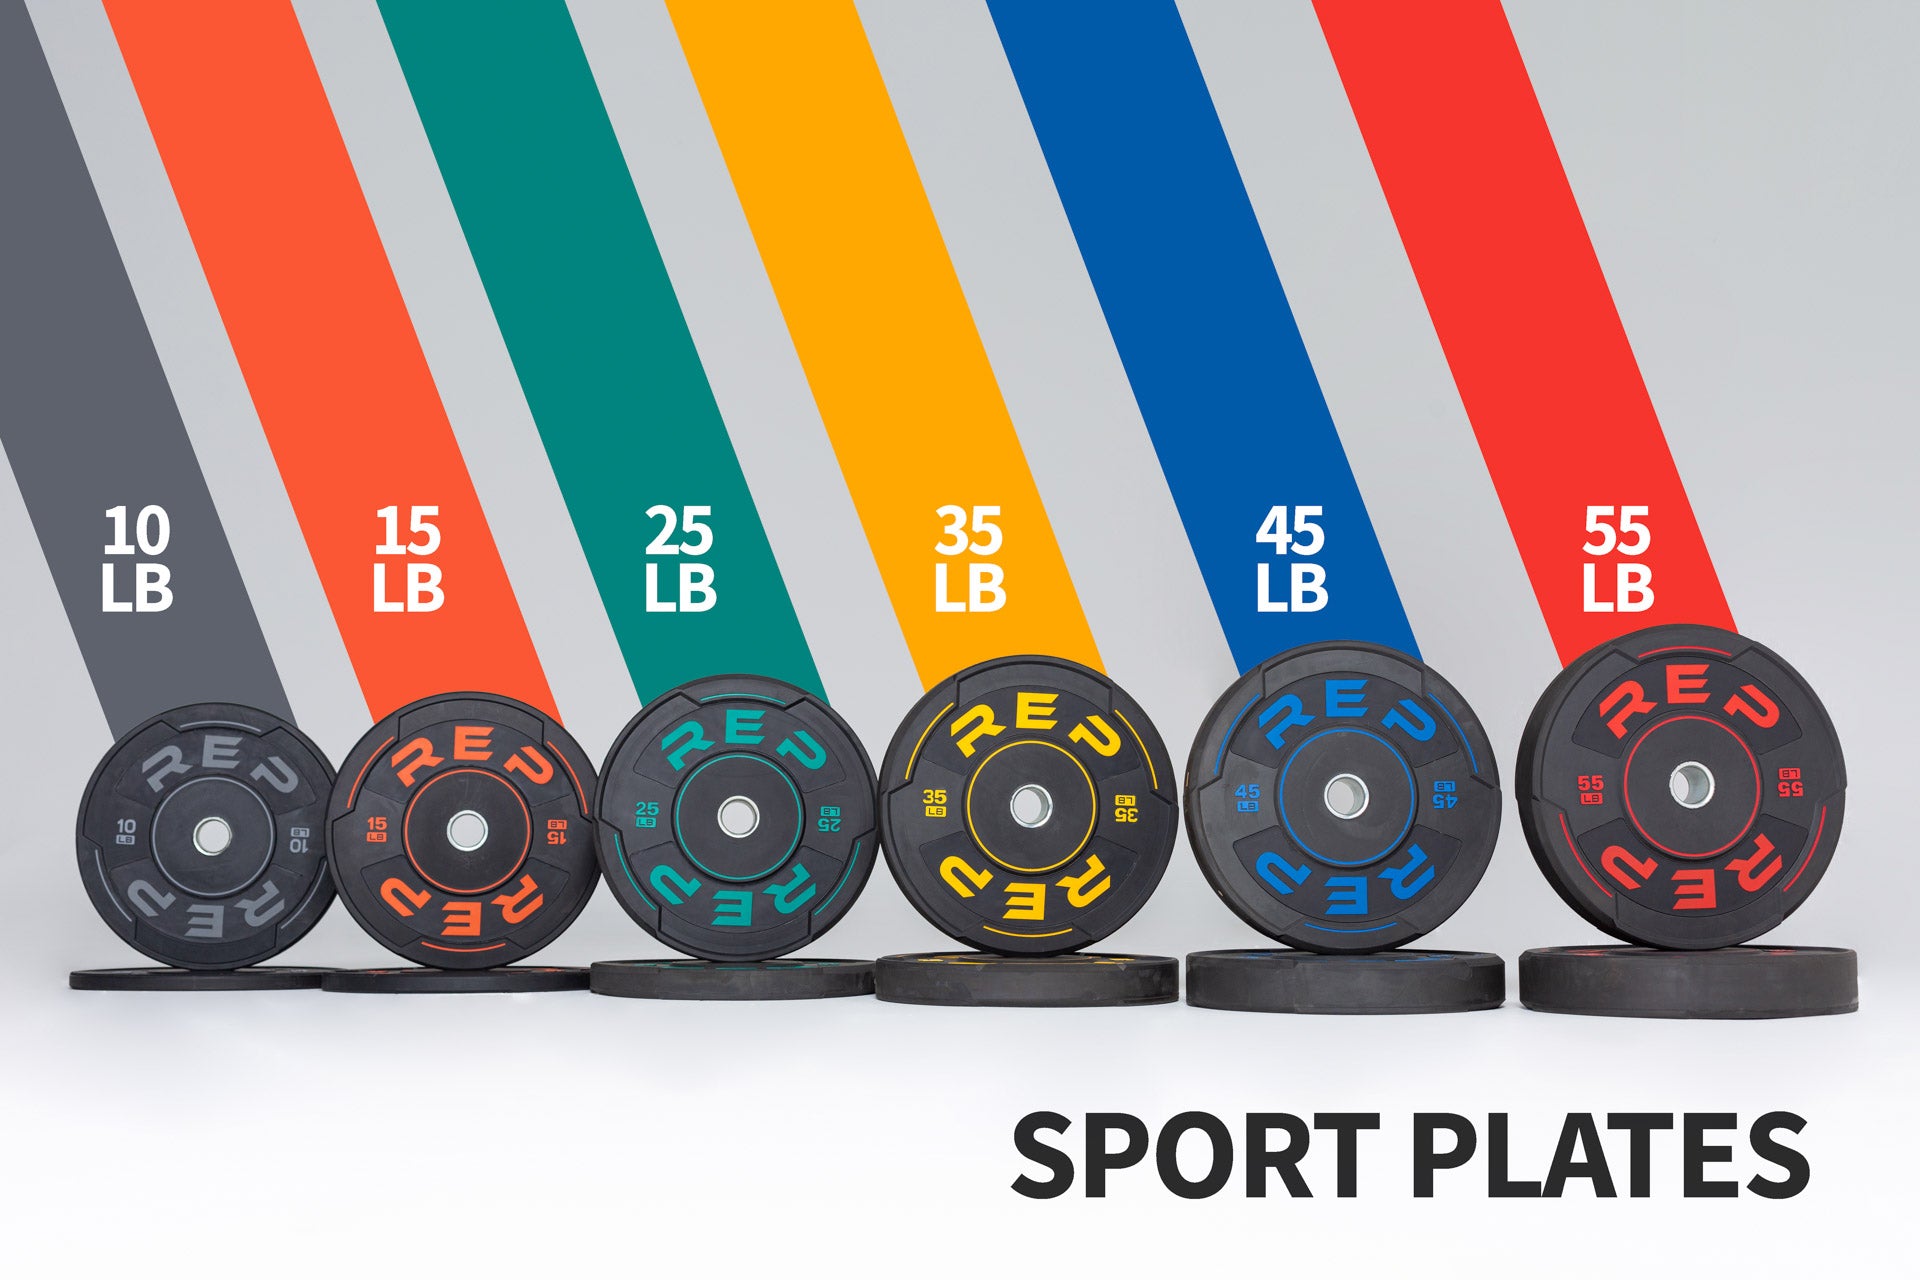 Graphic showing a full set of Sport Bumper Plate pairs and their associated weights and colors: gray 10, orange 15, green 25, yellow 35, blue 45, and red 55lb pairs.